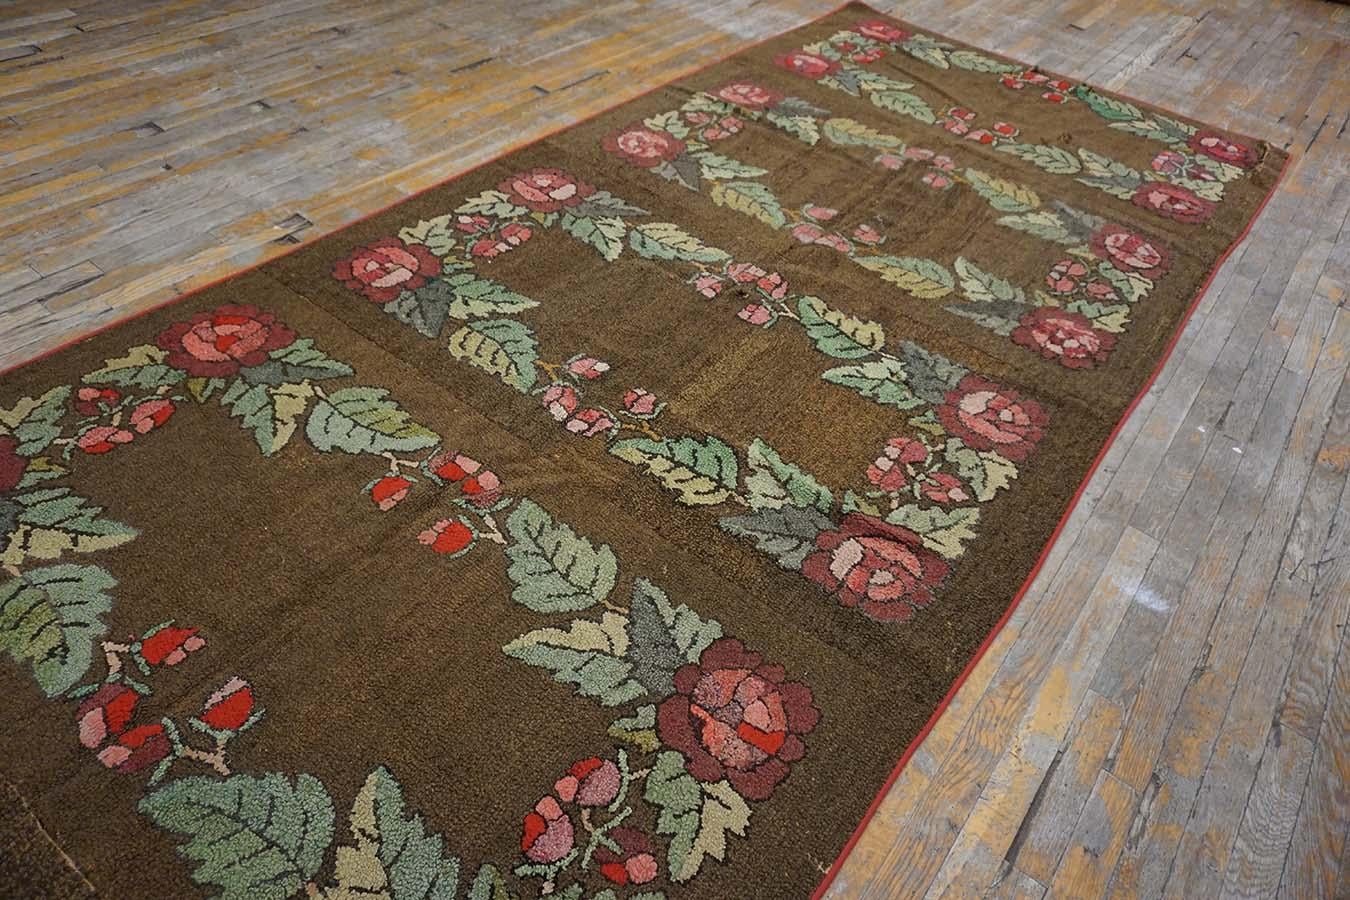 Folk Art Early 20th Century American Hooked Rug ( 5' x 16' - 152 x 488 ) For Sale